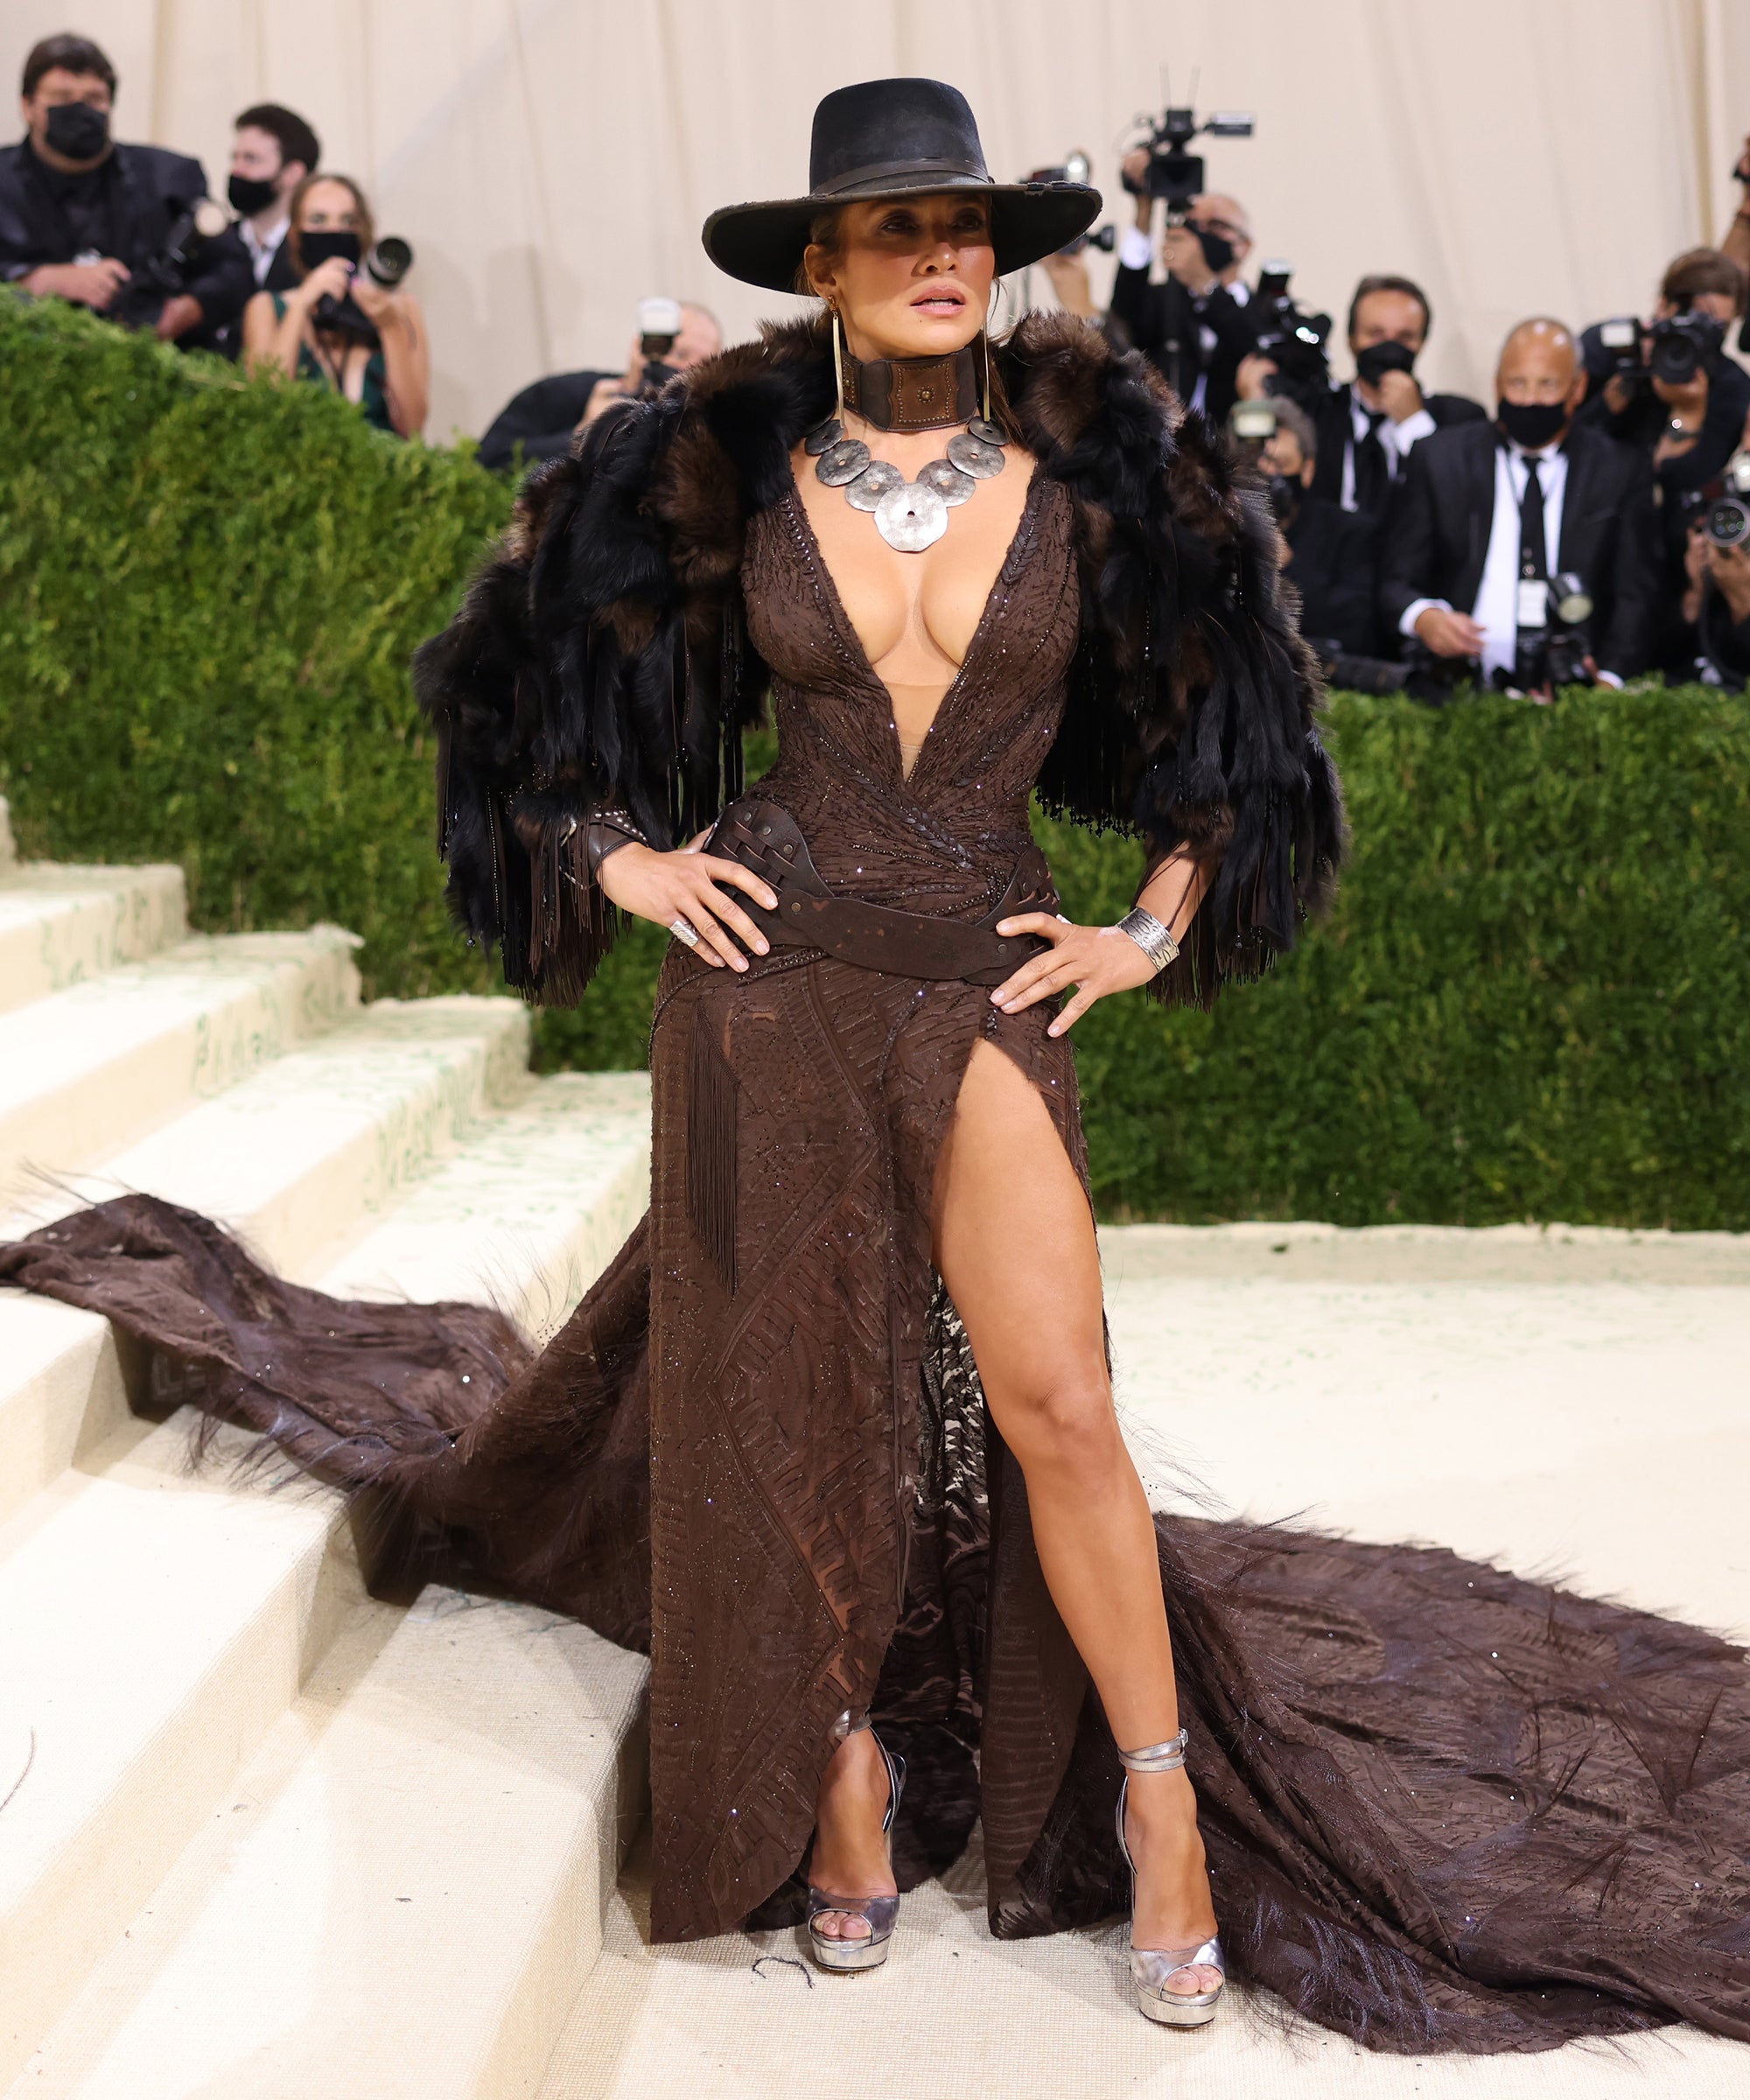 Met Gala 2021: Naomi Osaka Makes a Show-Stopping Statement in